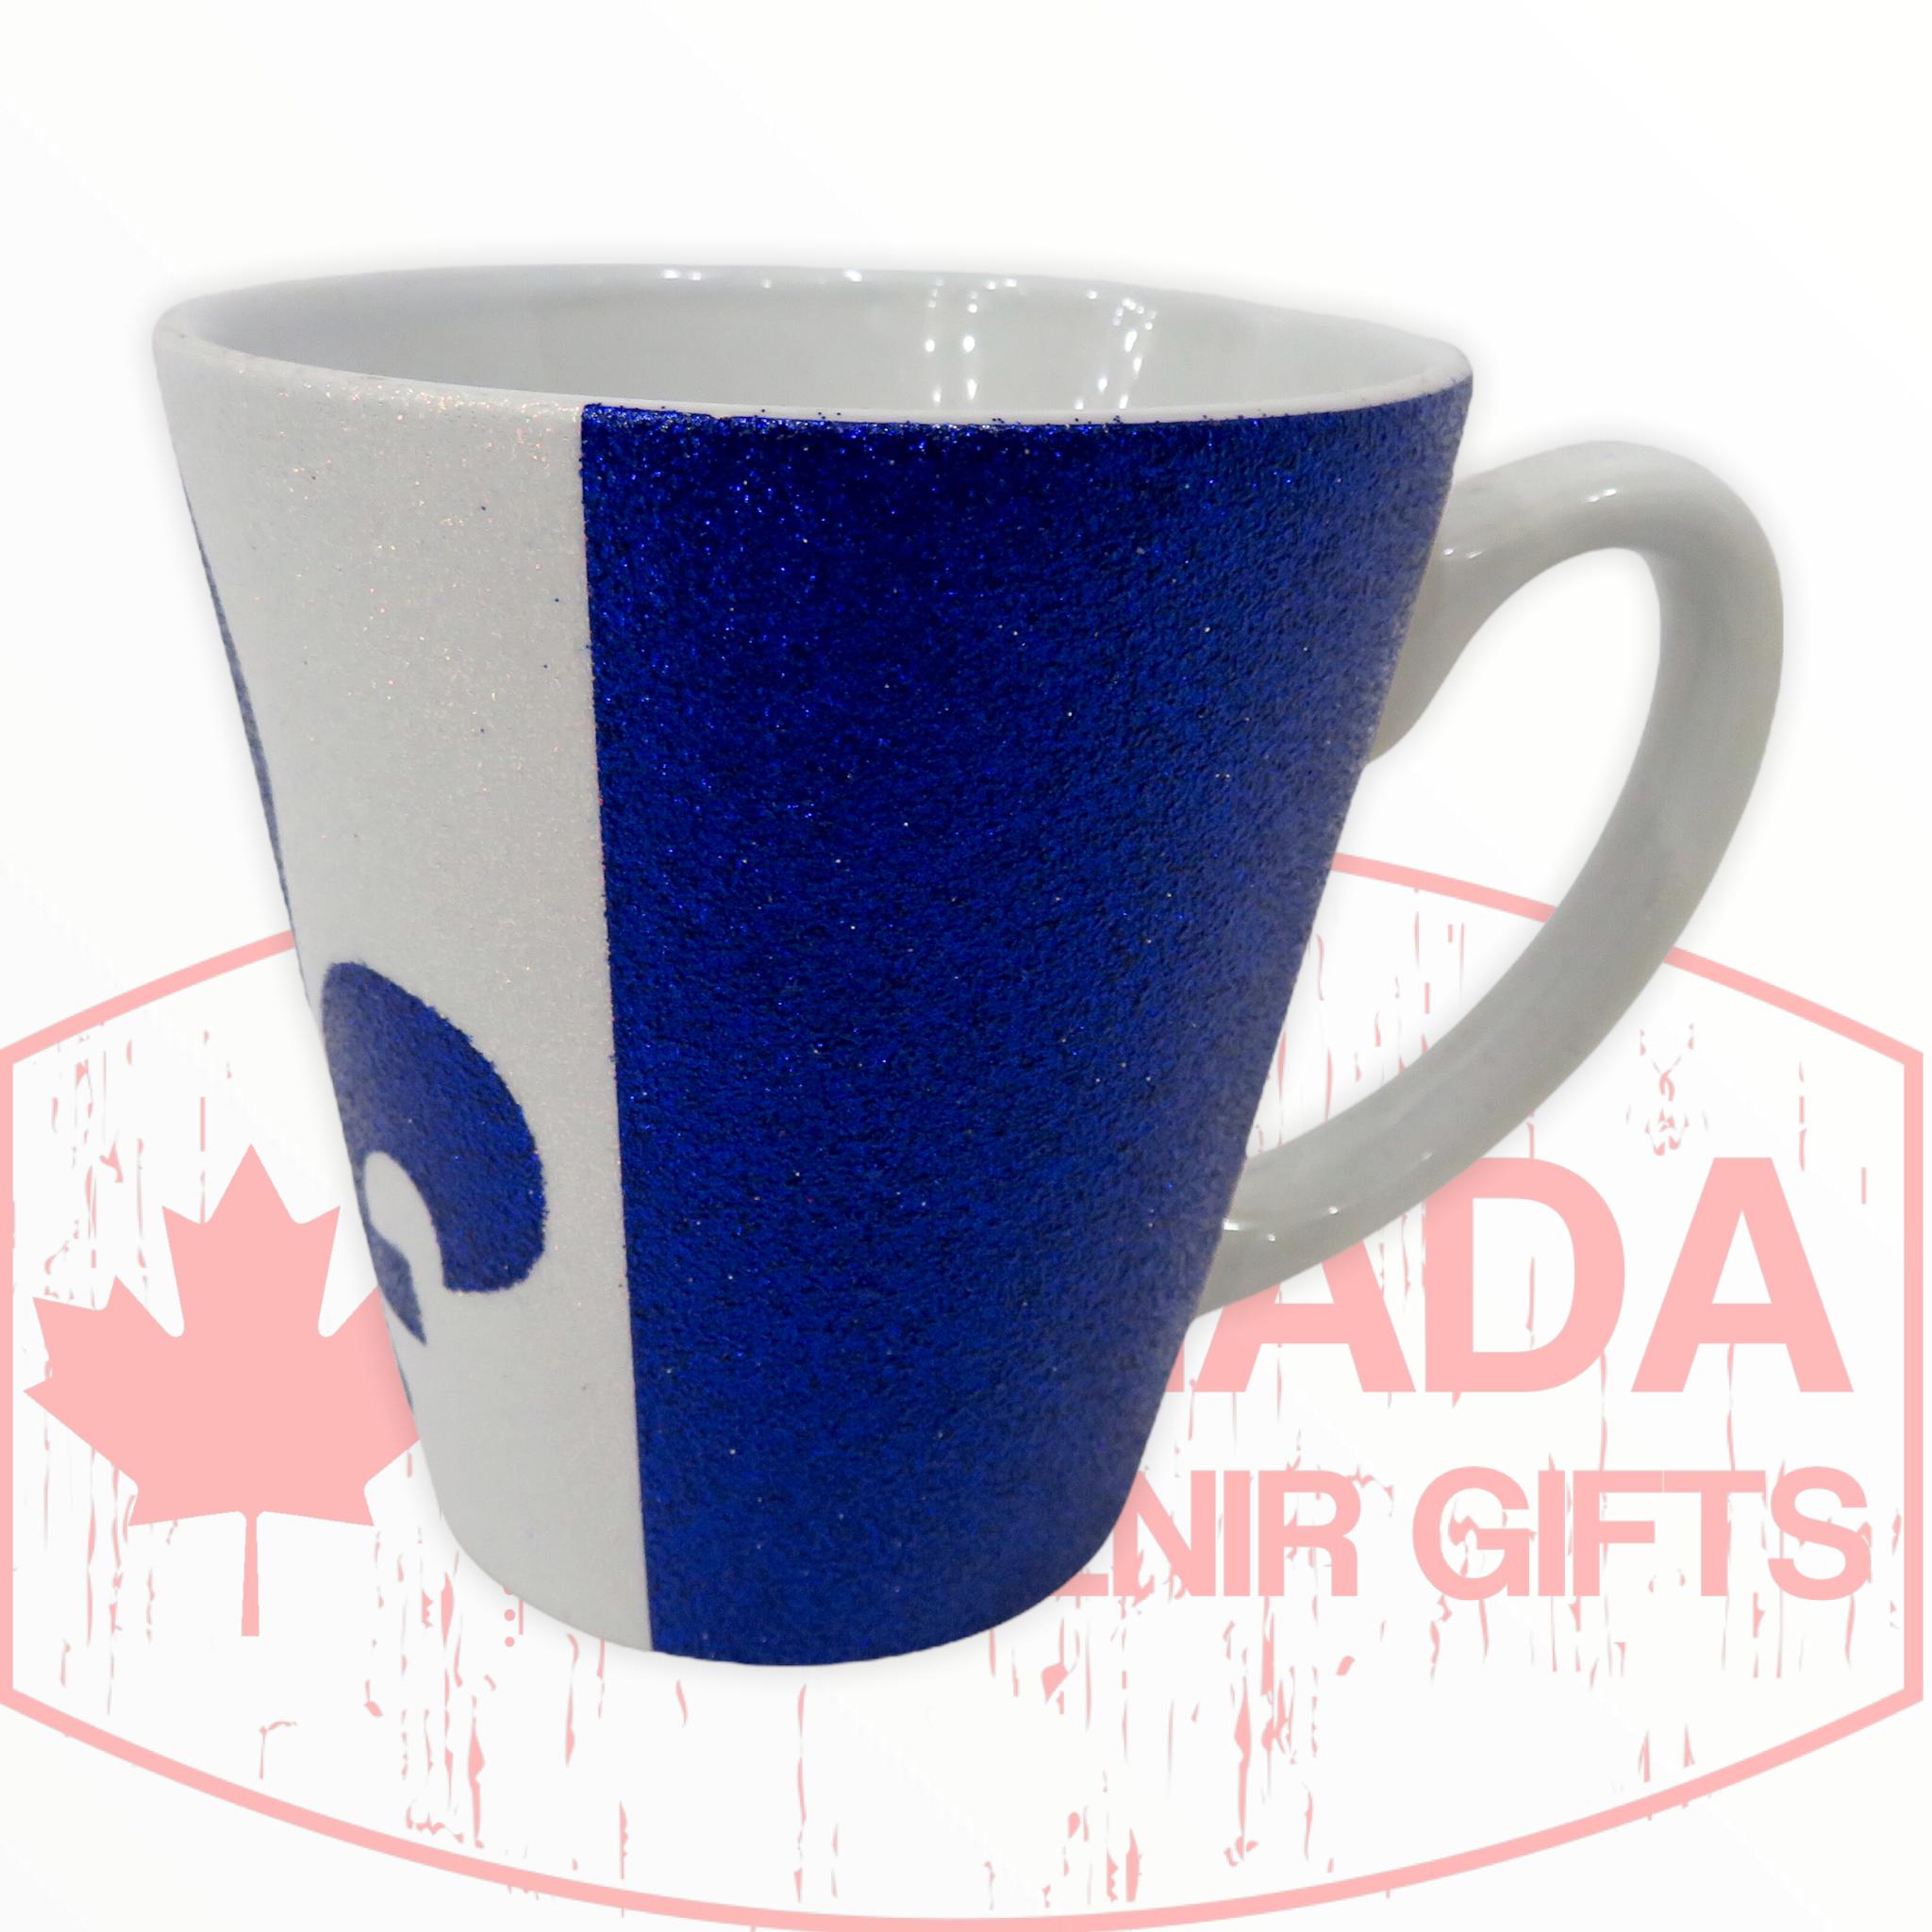 Quebec Fleur de Lys 14-Ounce Glitter Mug | Elegant Ceramic Coffee Mug / Tea Cup, Novelty Drinkware | Home & Kitchen Gifts And Collectibles